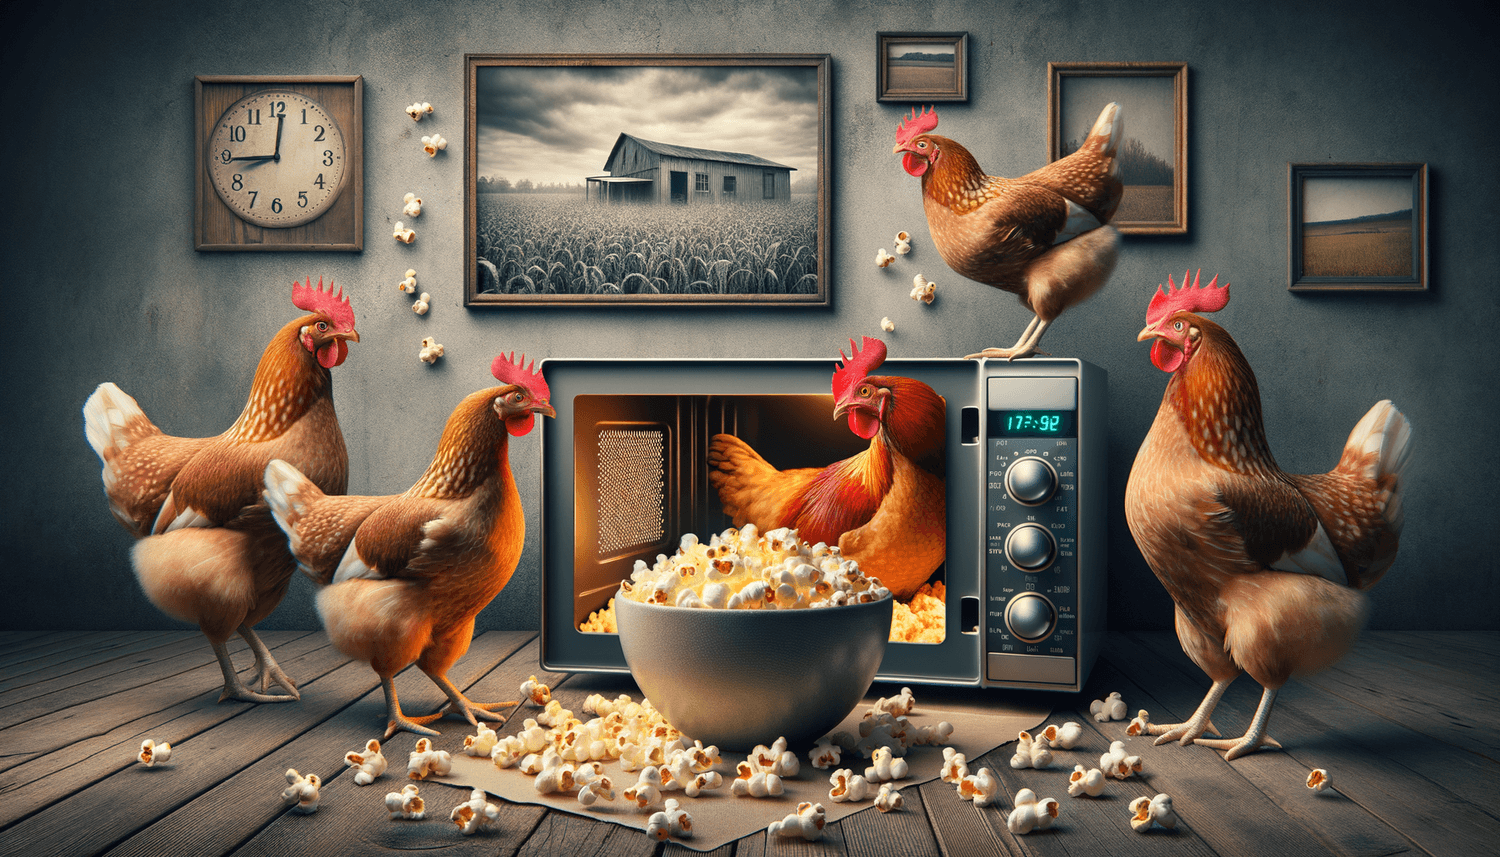 Can Chickens Eat Microwave Popcorn?